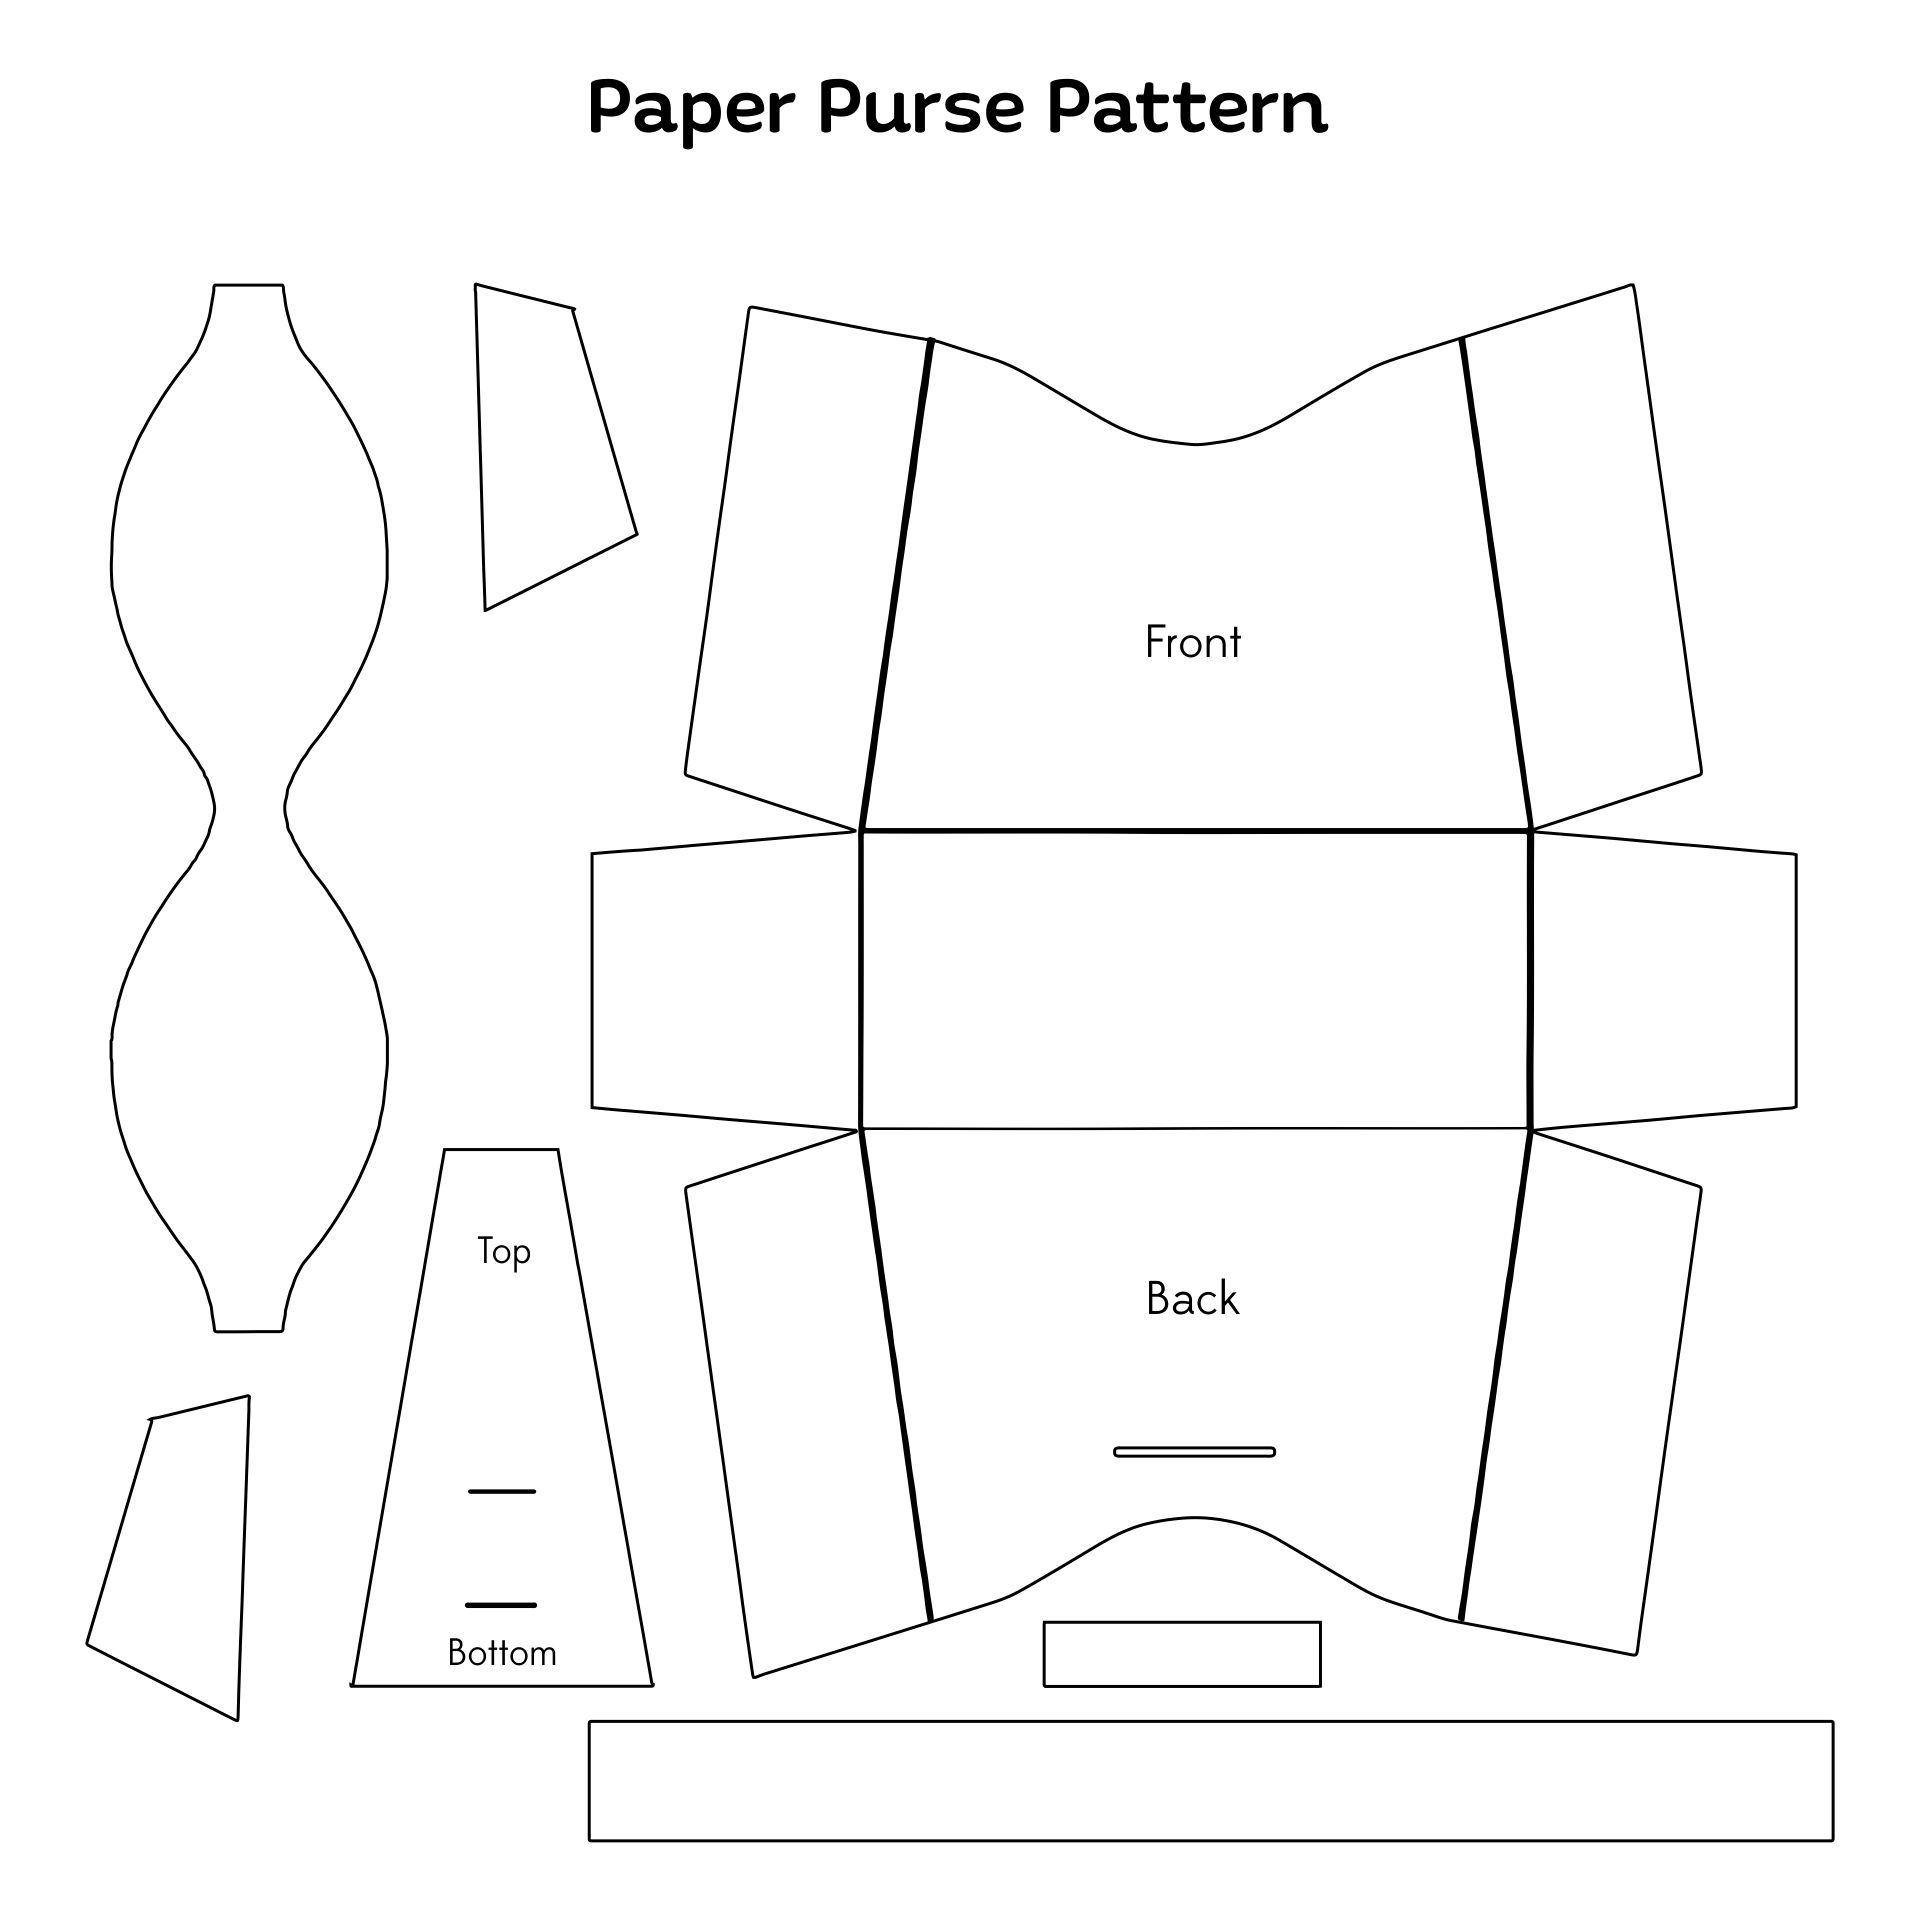 Free Paper Purse Templates Download | The Art of Mike Mignola